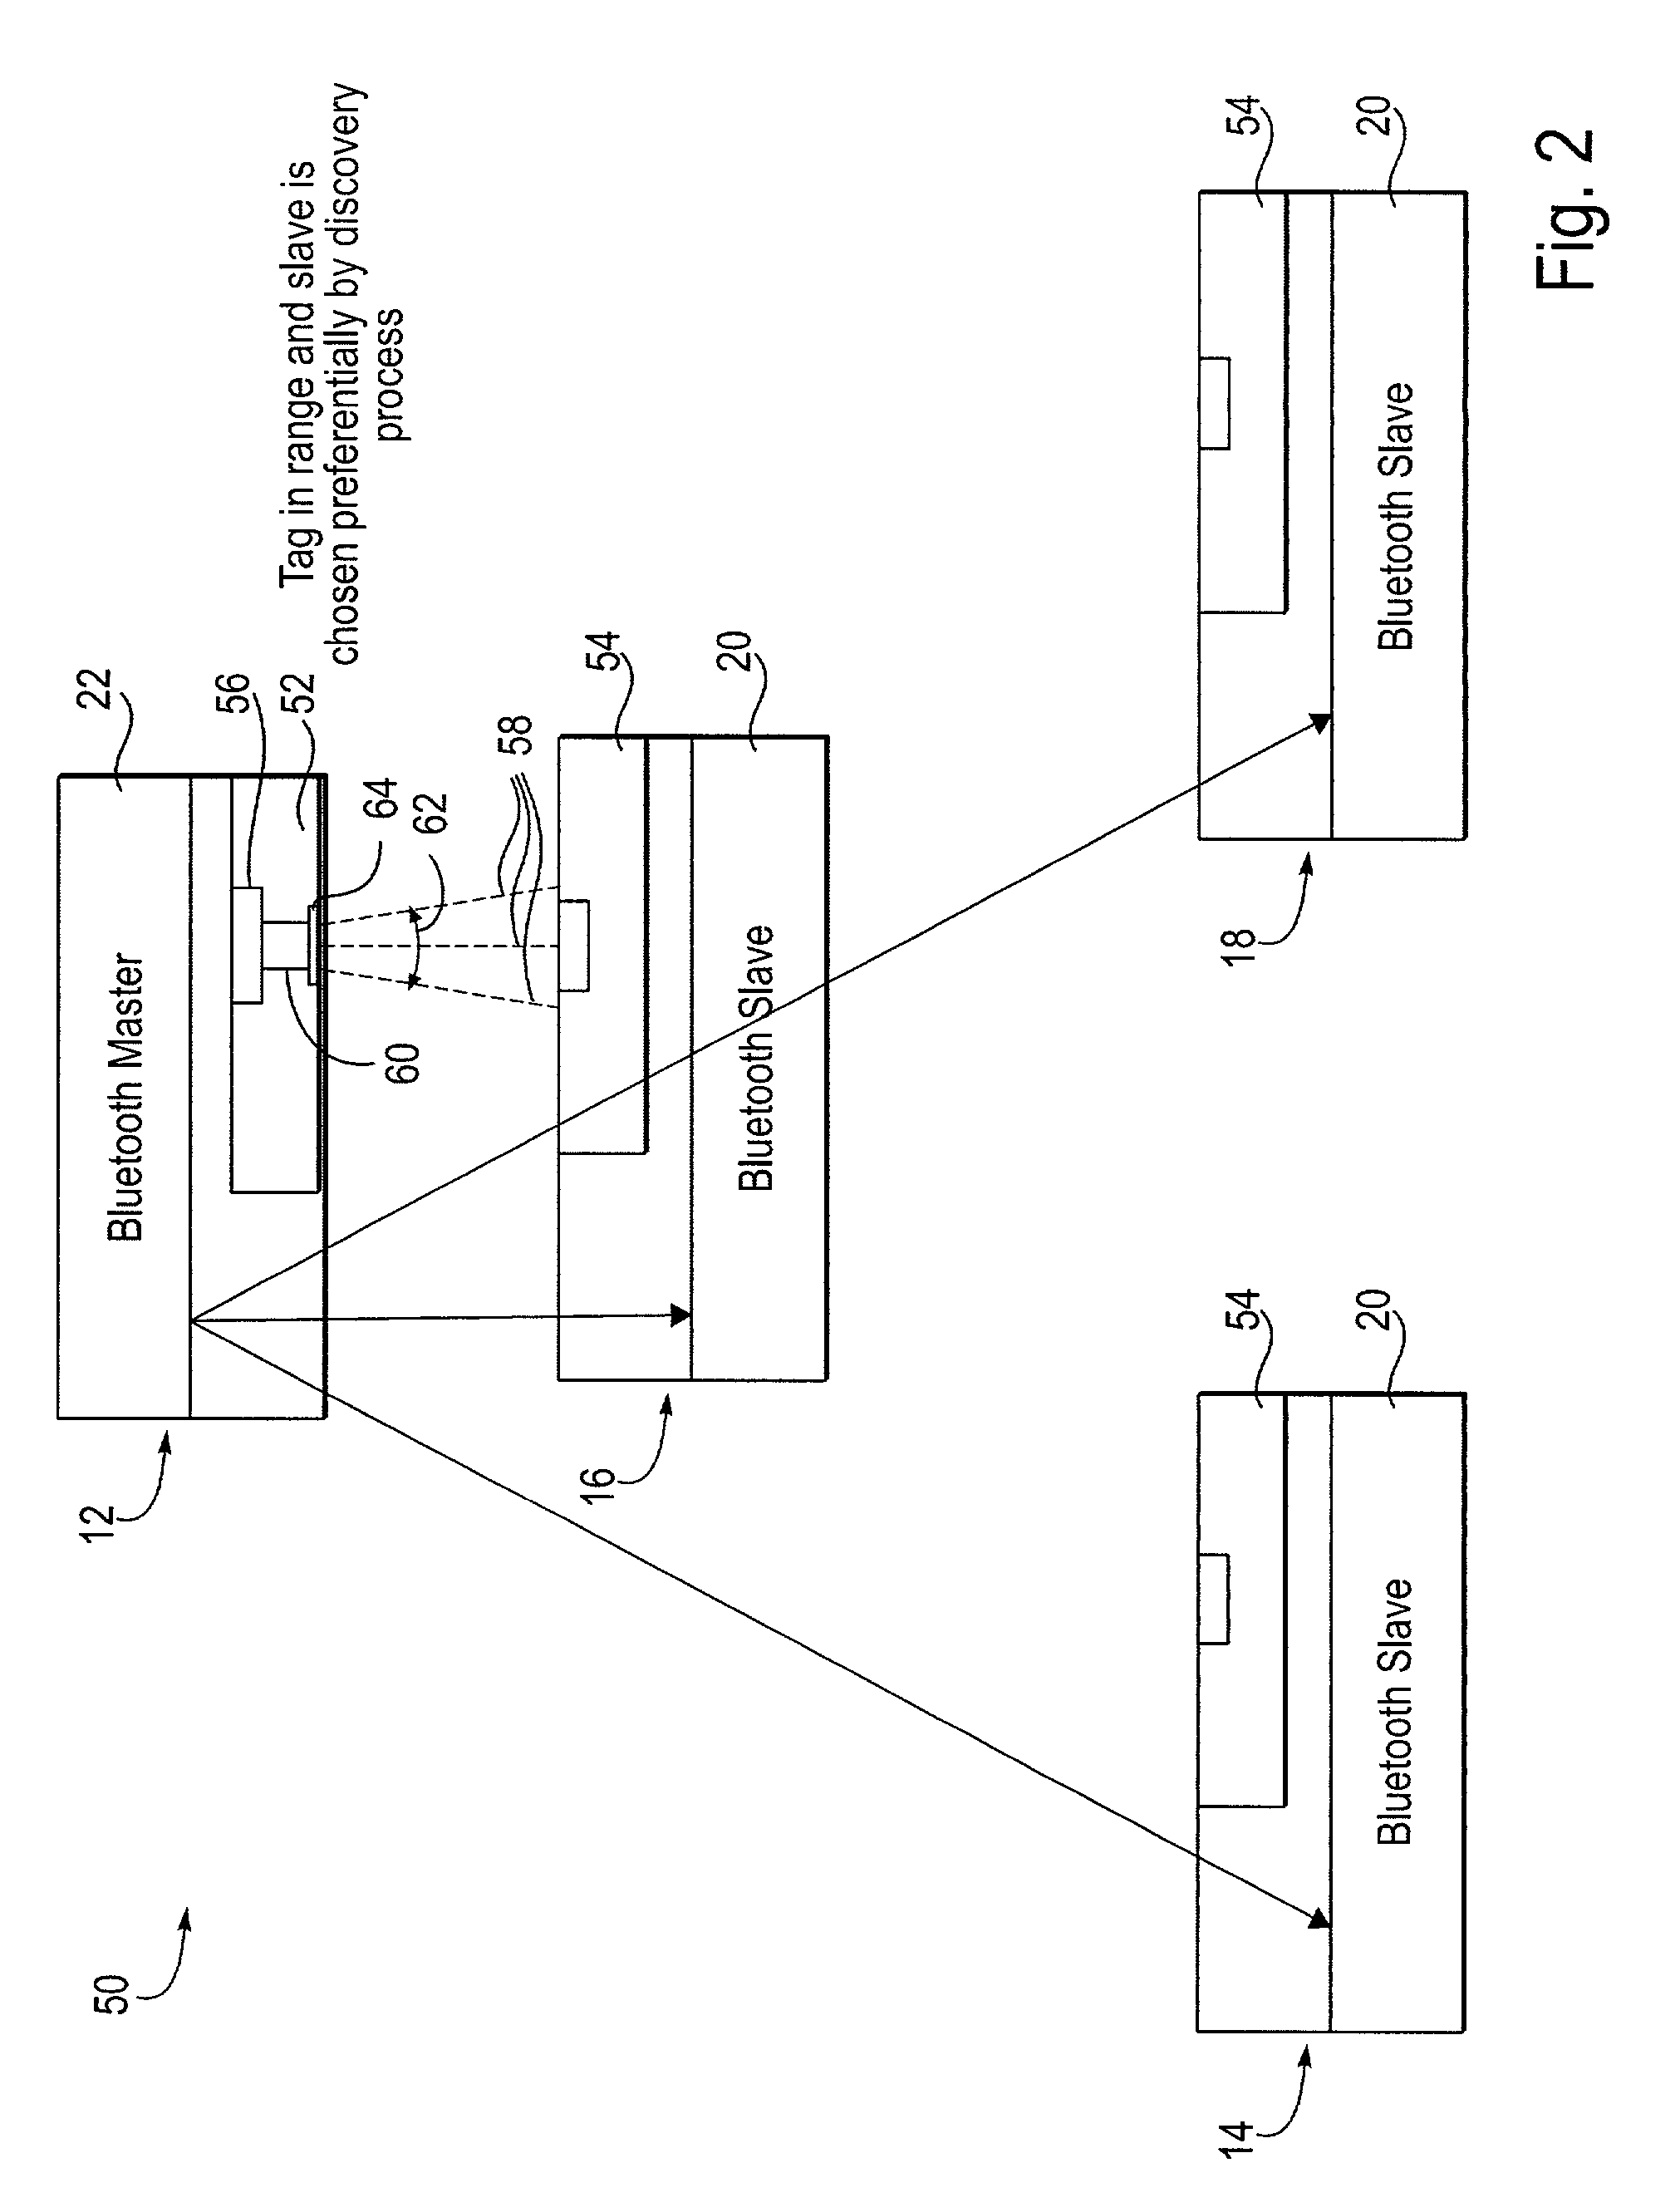 Method and system for identifying when a first device is within a physical range of a second device